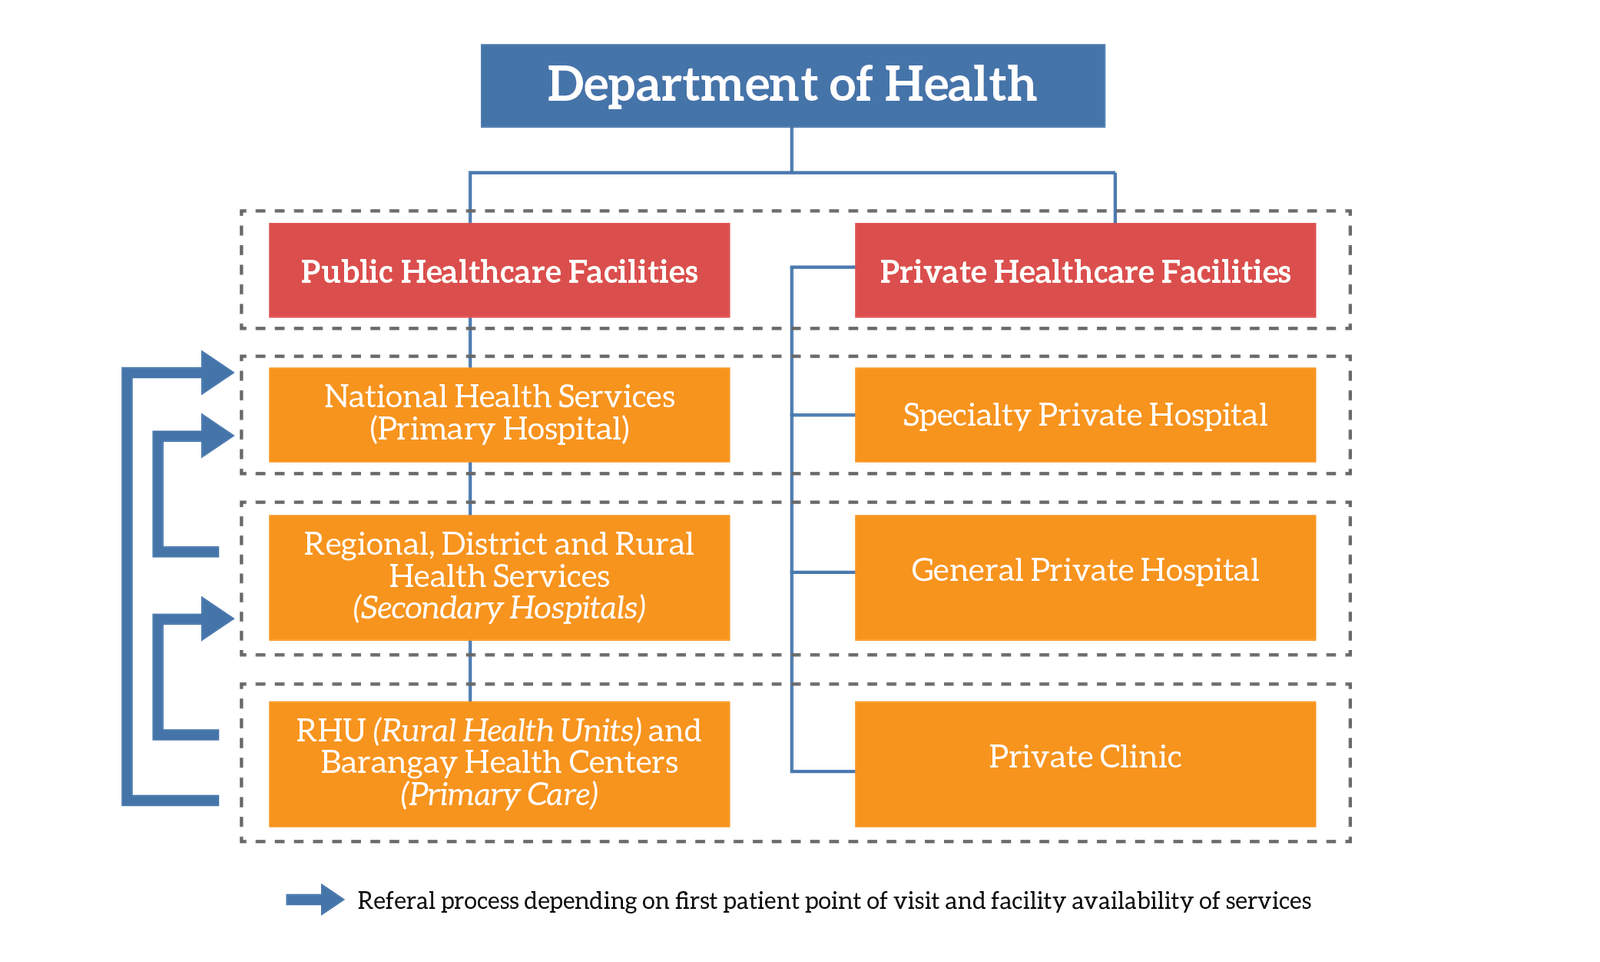 Healthcare System Structure and Referral System